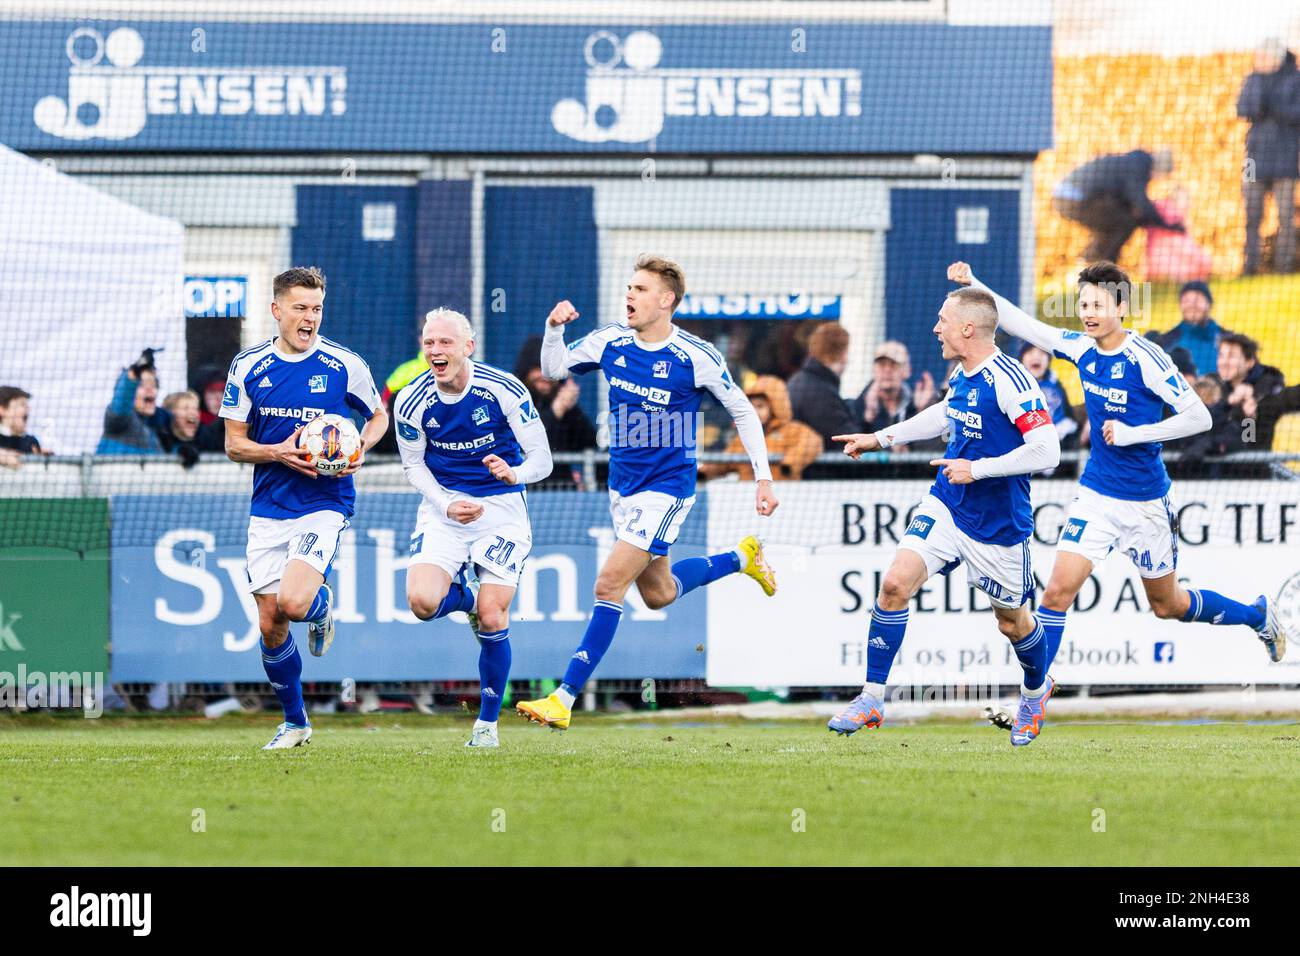 Lyngby, Denmark. 19th, February 2023. Alfred Finnbogason (18) of Lyngby Boldklub equalises for 1-1 during the Danish 3F Superliga match between Lyngby Boldklub and FC Nordsjaelland at Lyngby Stadion in Lyngby. (Photo credit: Gonzales Photo - Dejan Obretkovic). Stock Photo